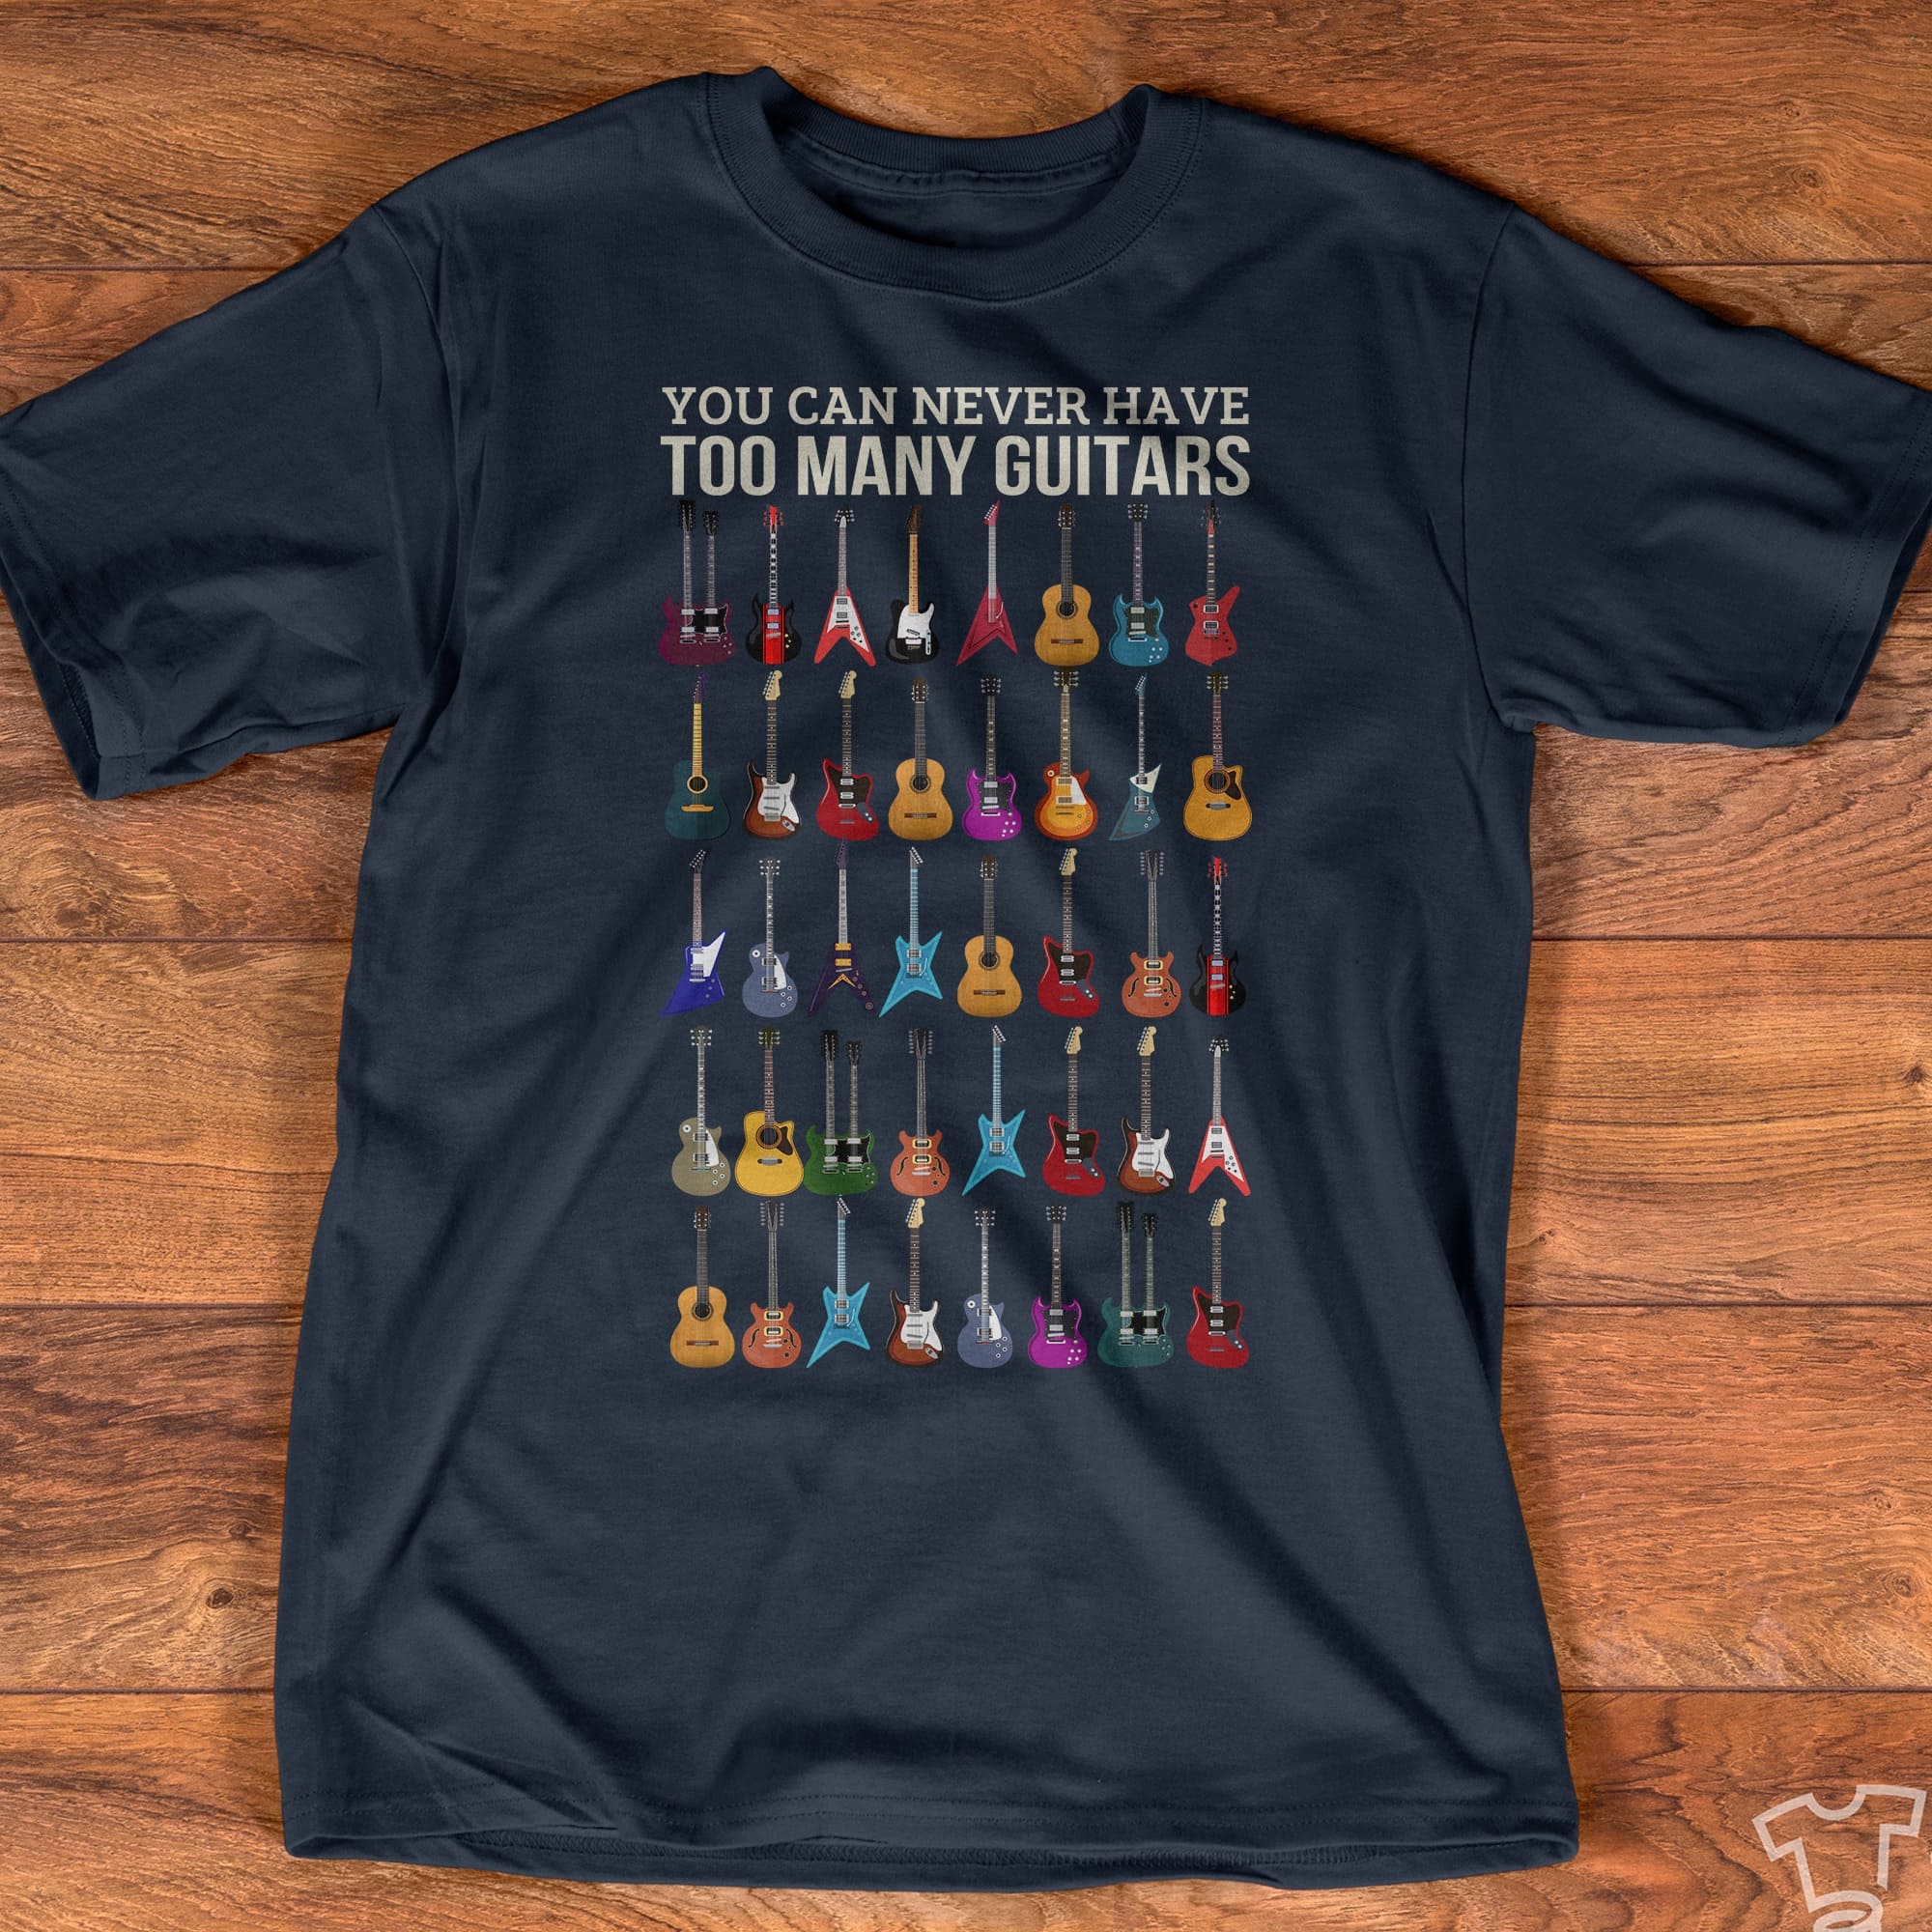 You can never have too many guitars - Gift for guitarist, the guitar collection T-shirt